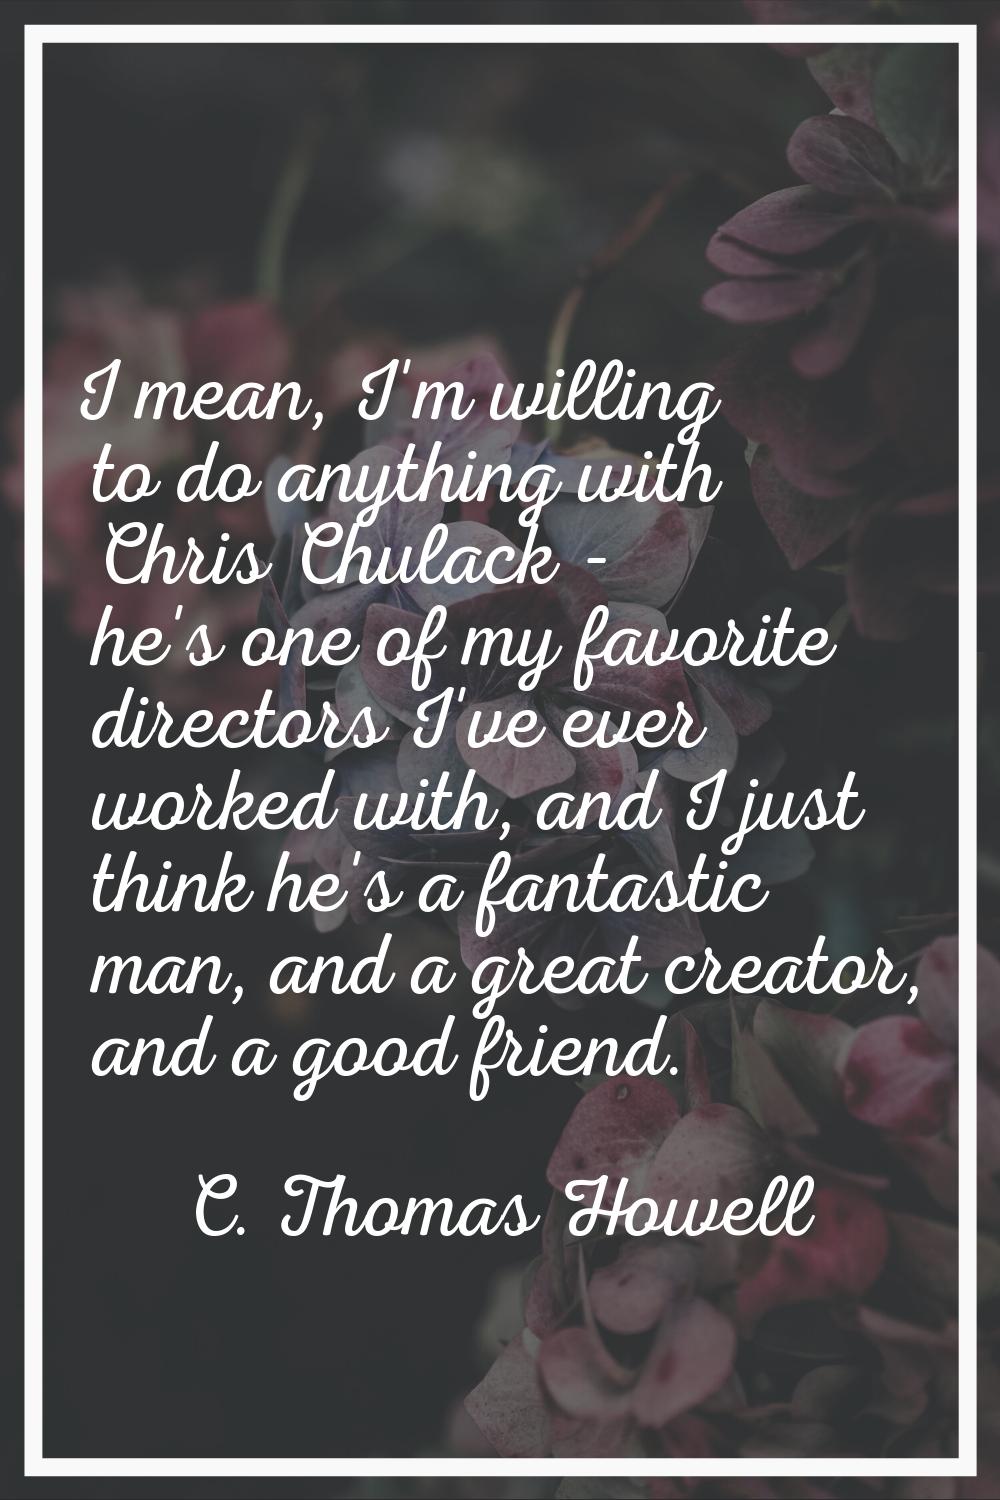 I mean, I'm willing to do anything with Chris Chulack - he's one of my favorite directors I've ever